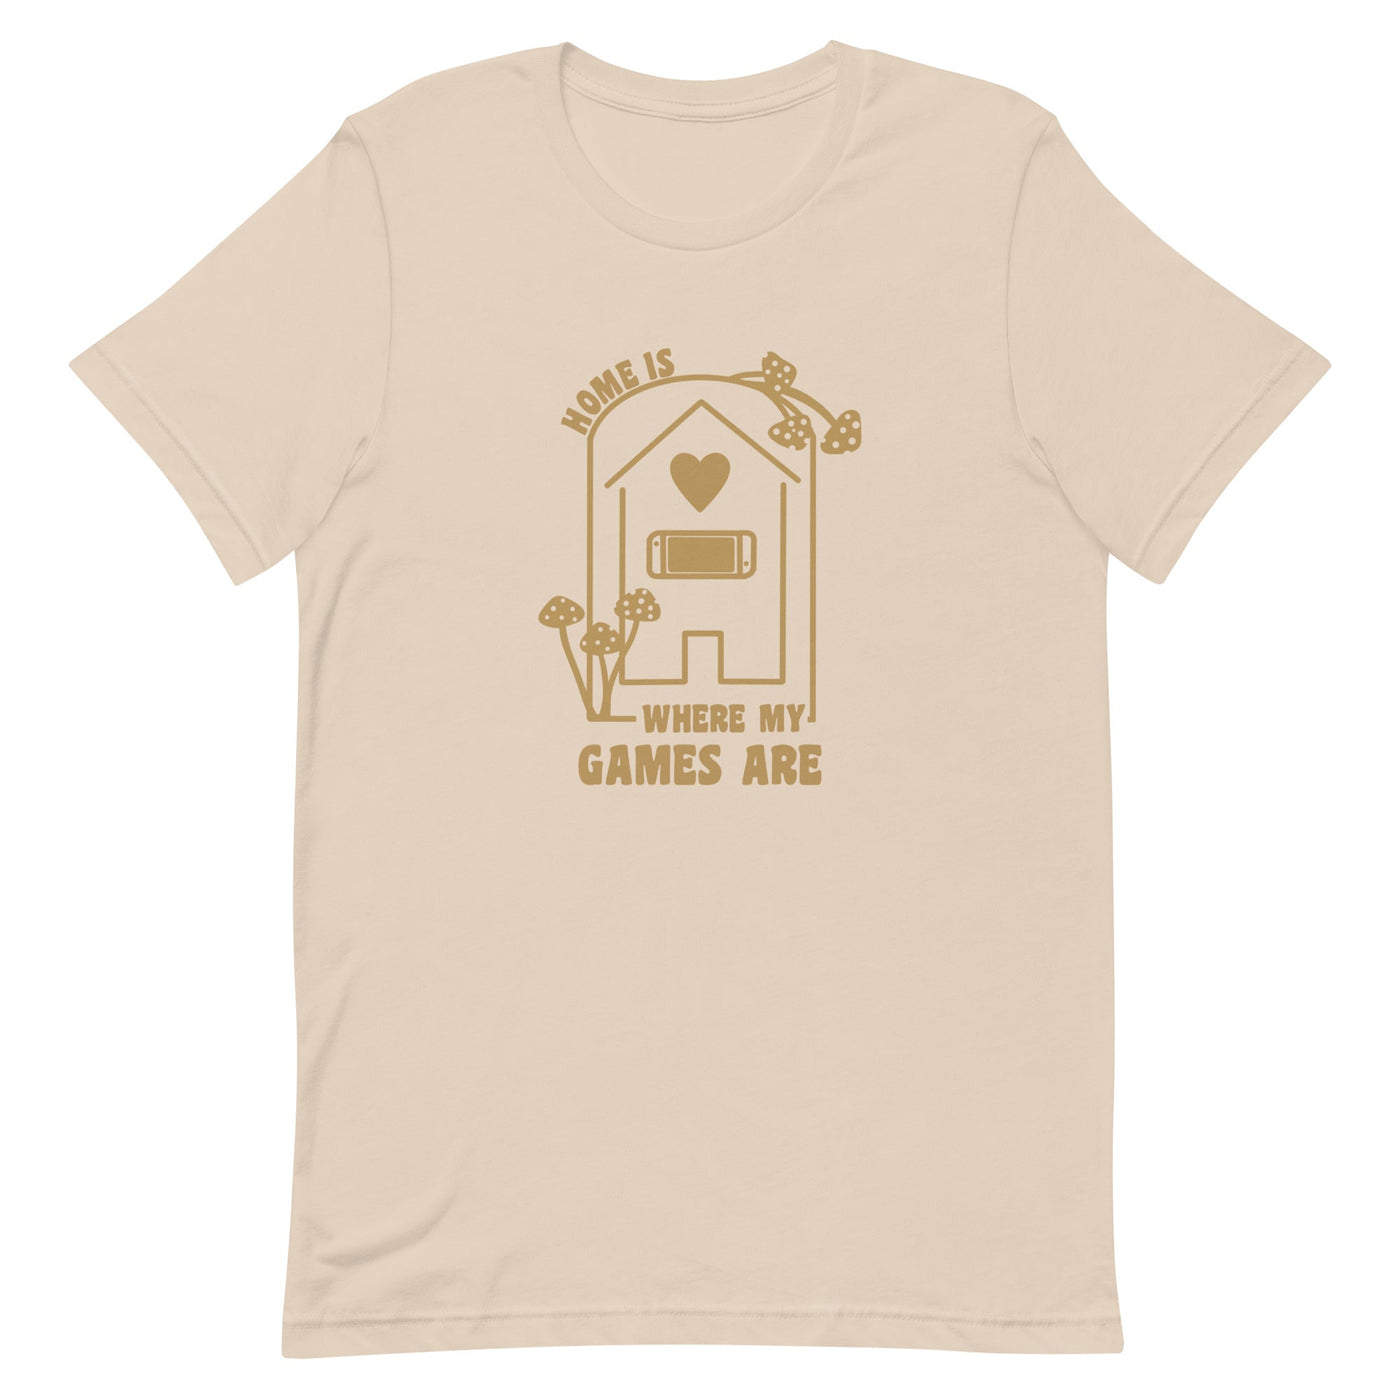 Where my Games Are | Unisex t-shirt | Cozy Gamer Threads and Thistles Inventory Soft Cream XS 